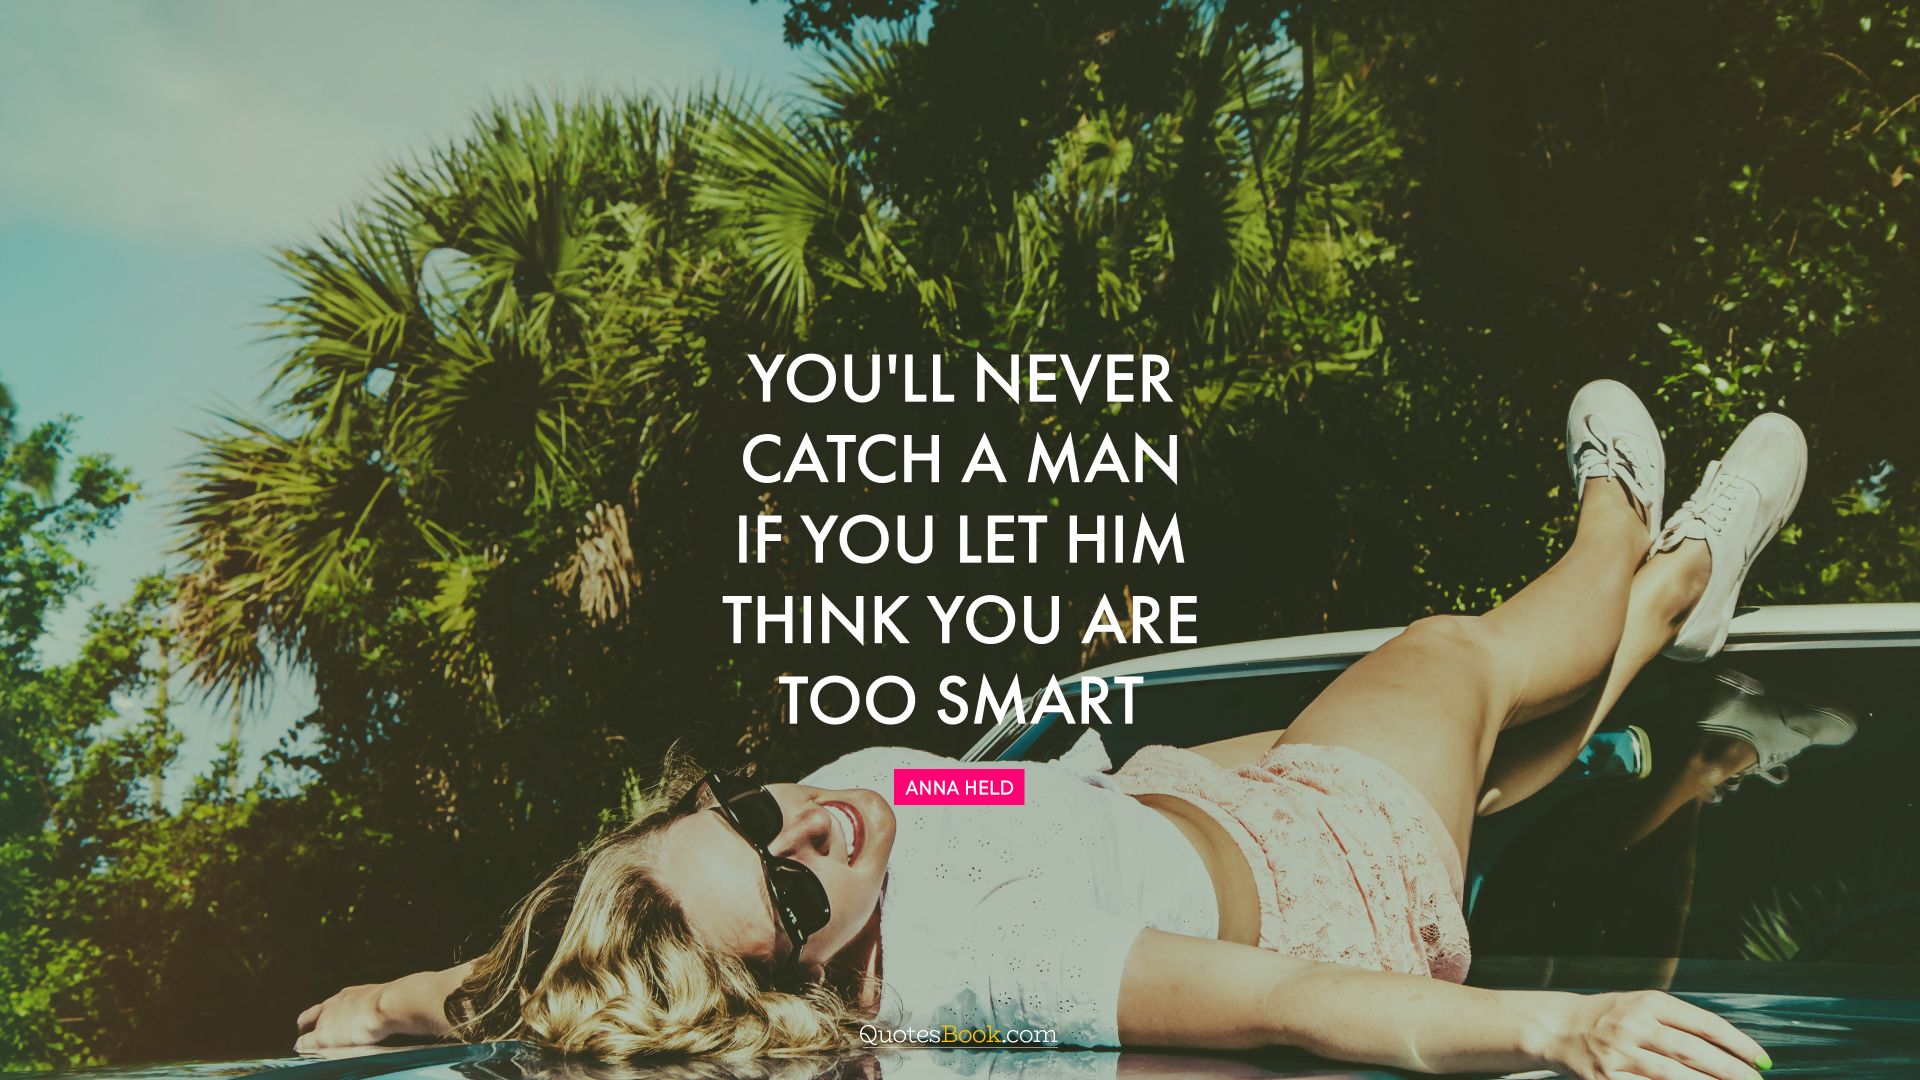 You'll never catch a man if you let him think you are too smart. - Quote by Anna Held